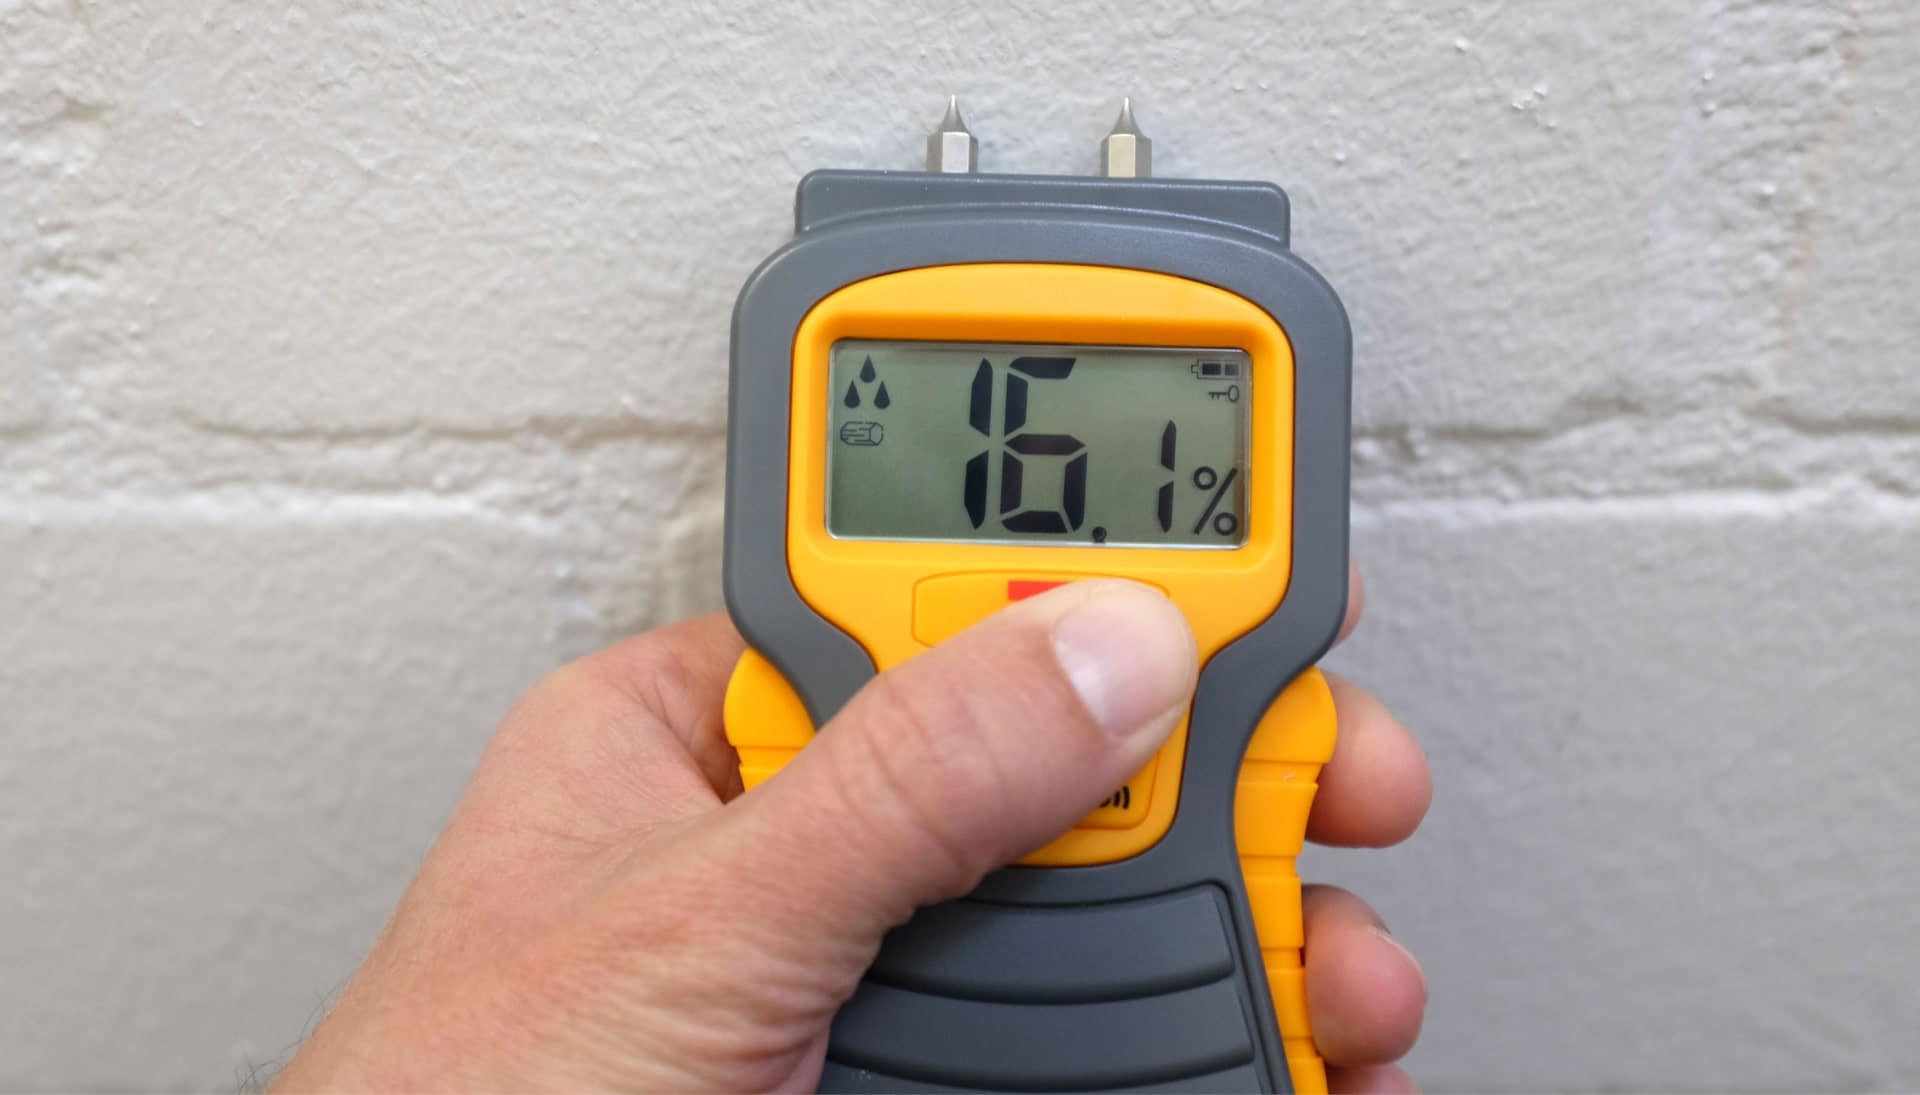 We provide fast, accurate, and affordable mold testing services in Kansas City, Missouri.